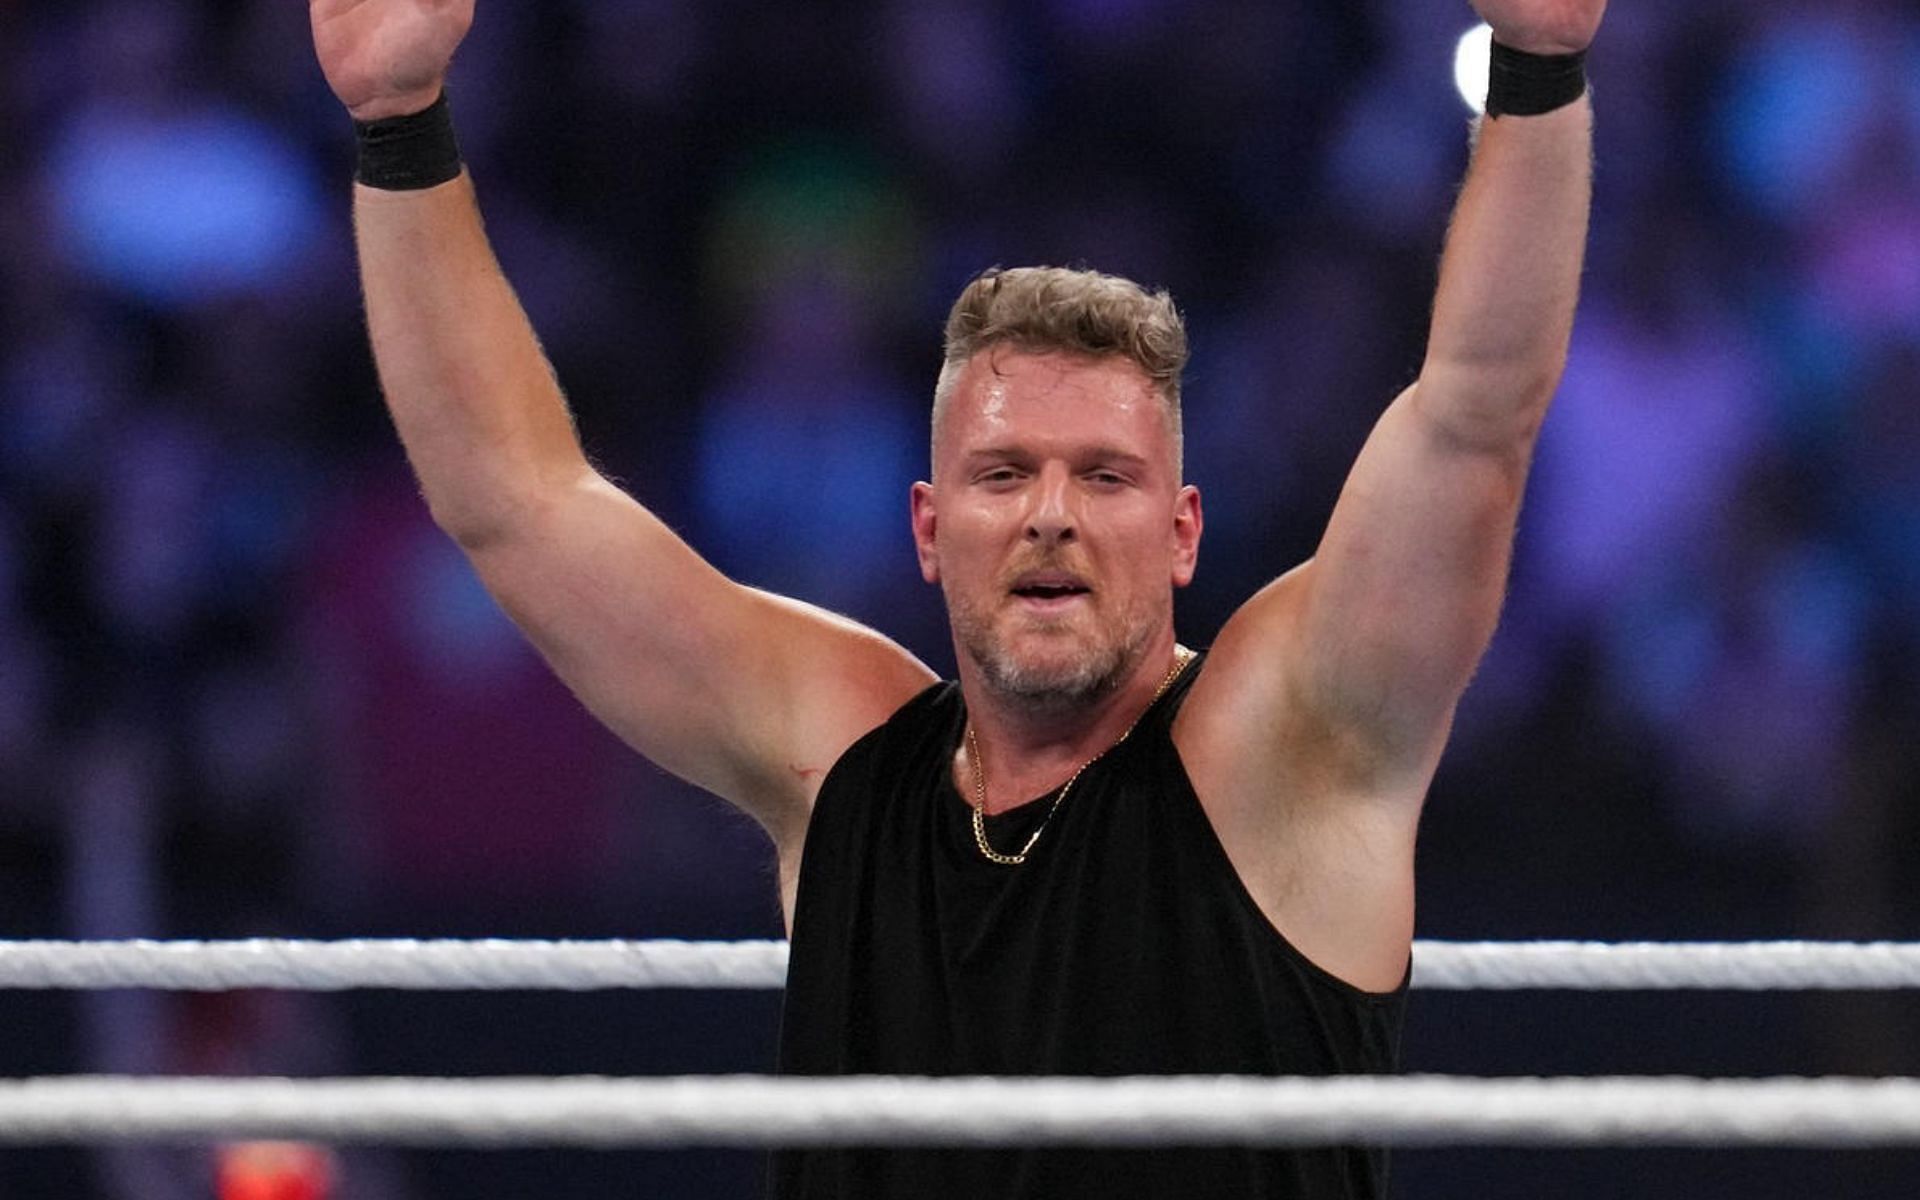 Pat McAfee wrestled at WrestleMania and SummerSlam!